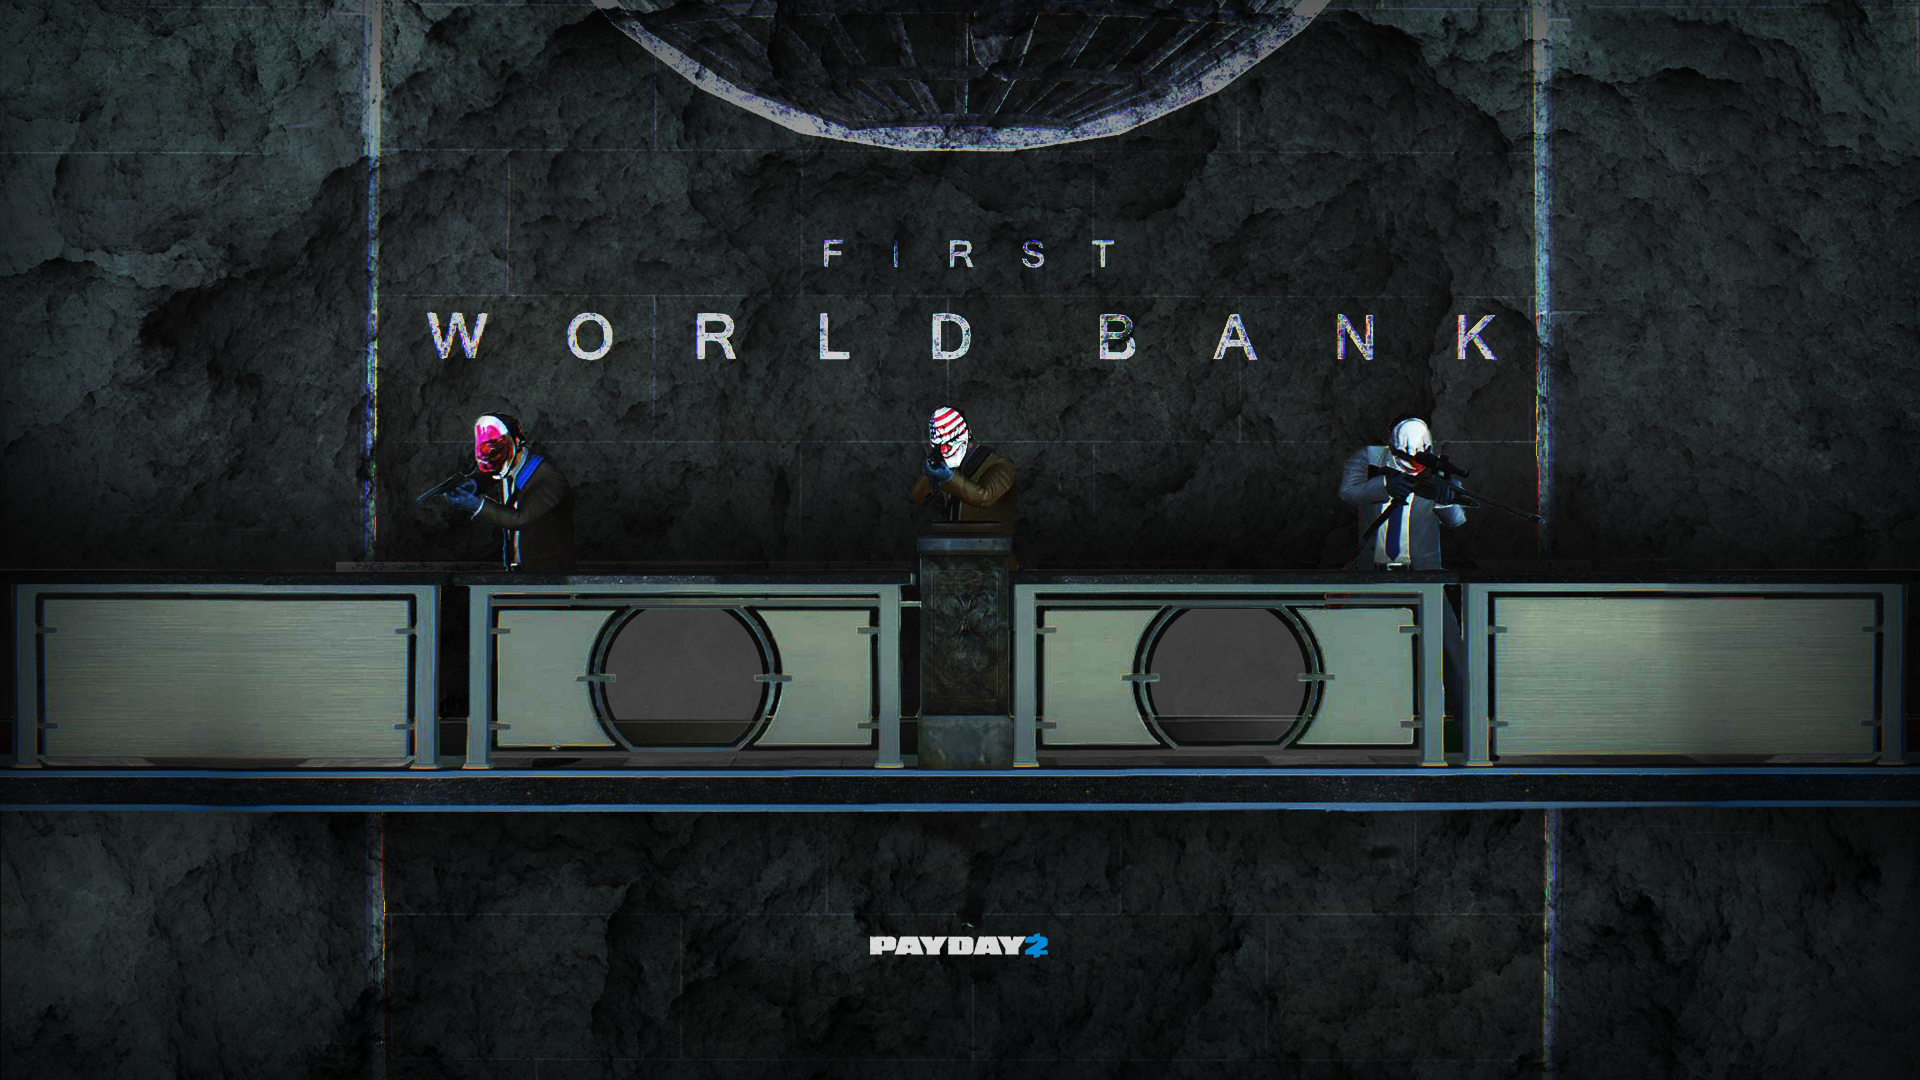 Payday 2 the first world bank фото 17